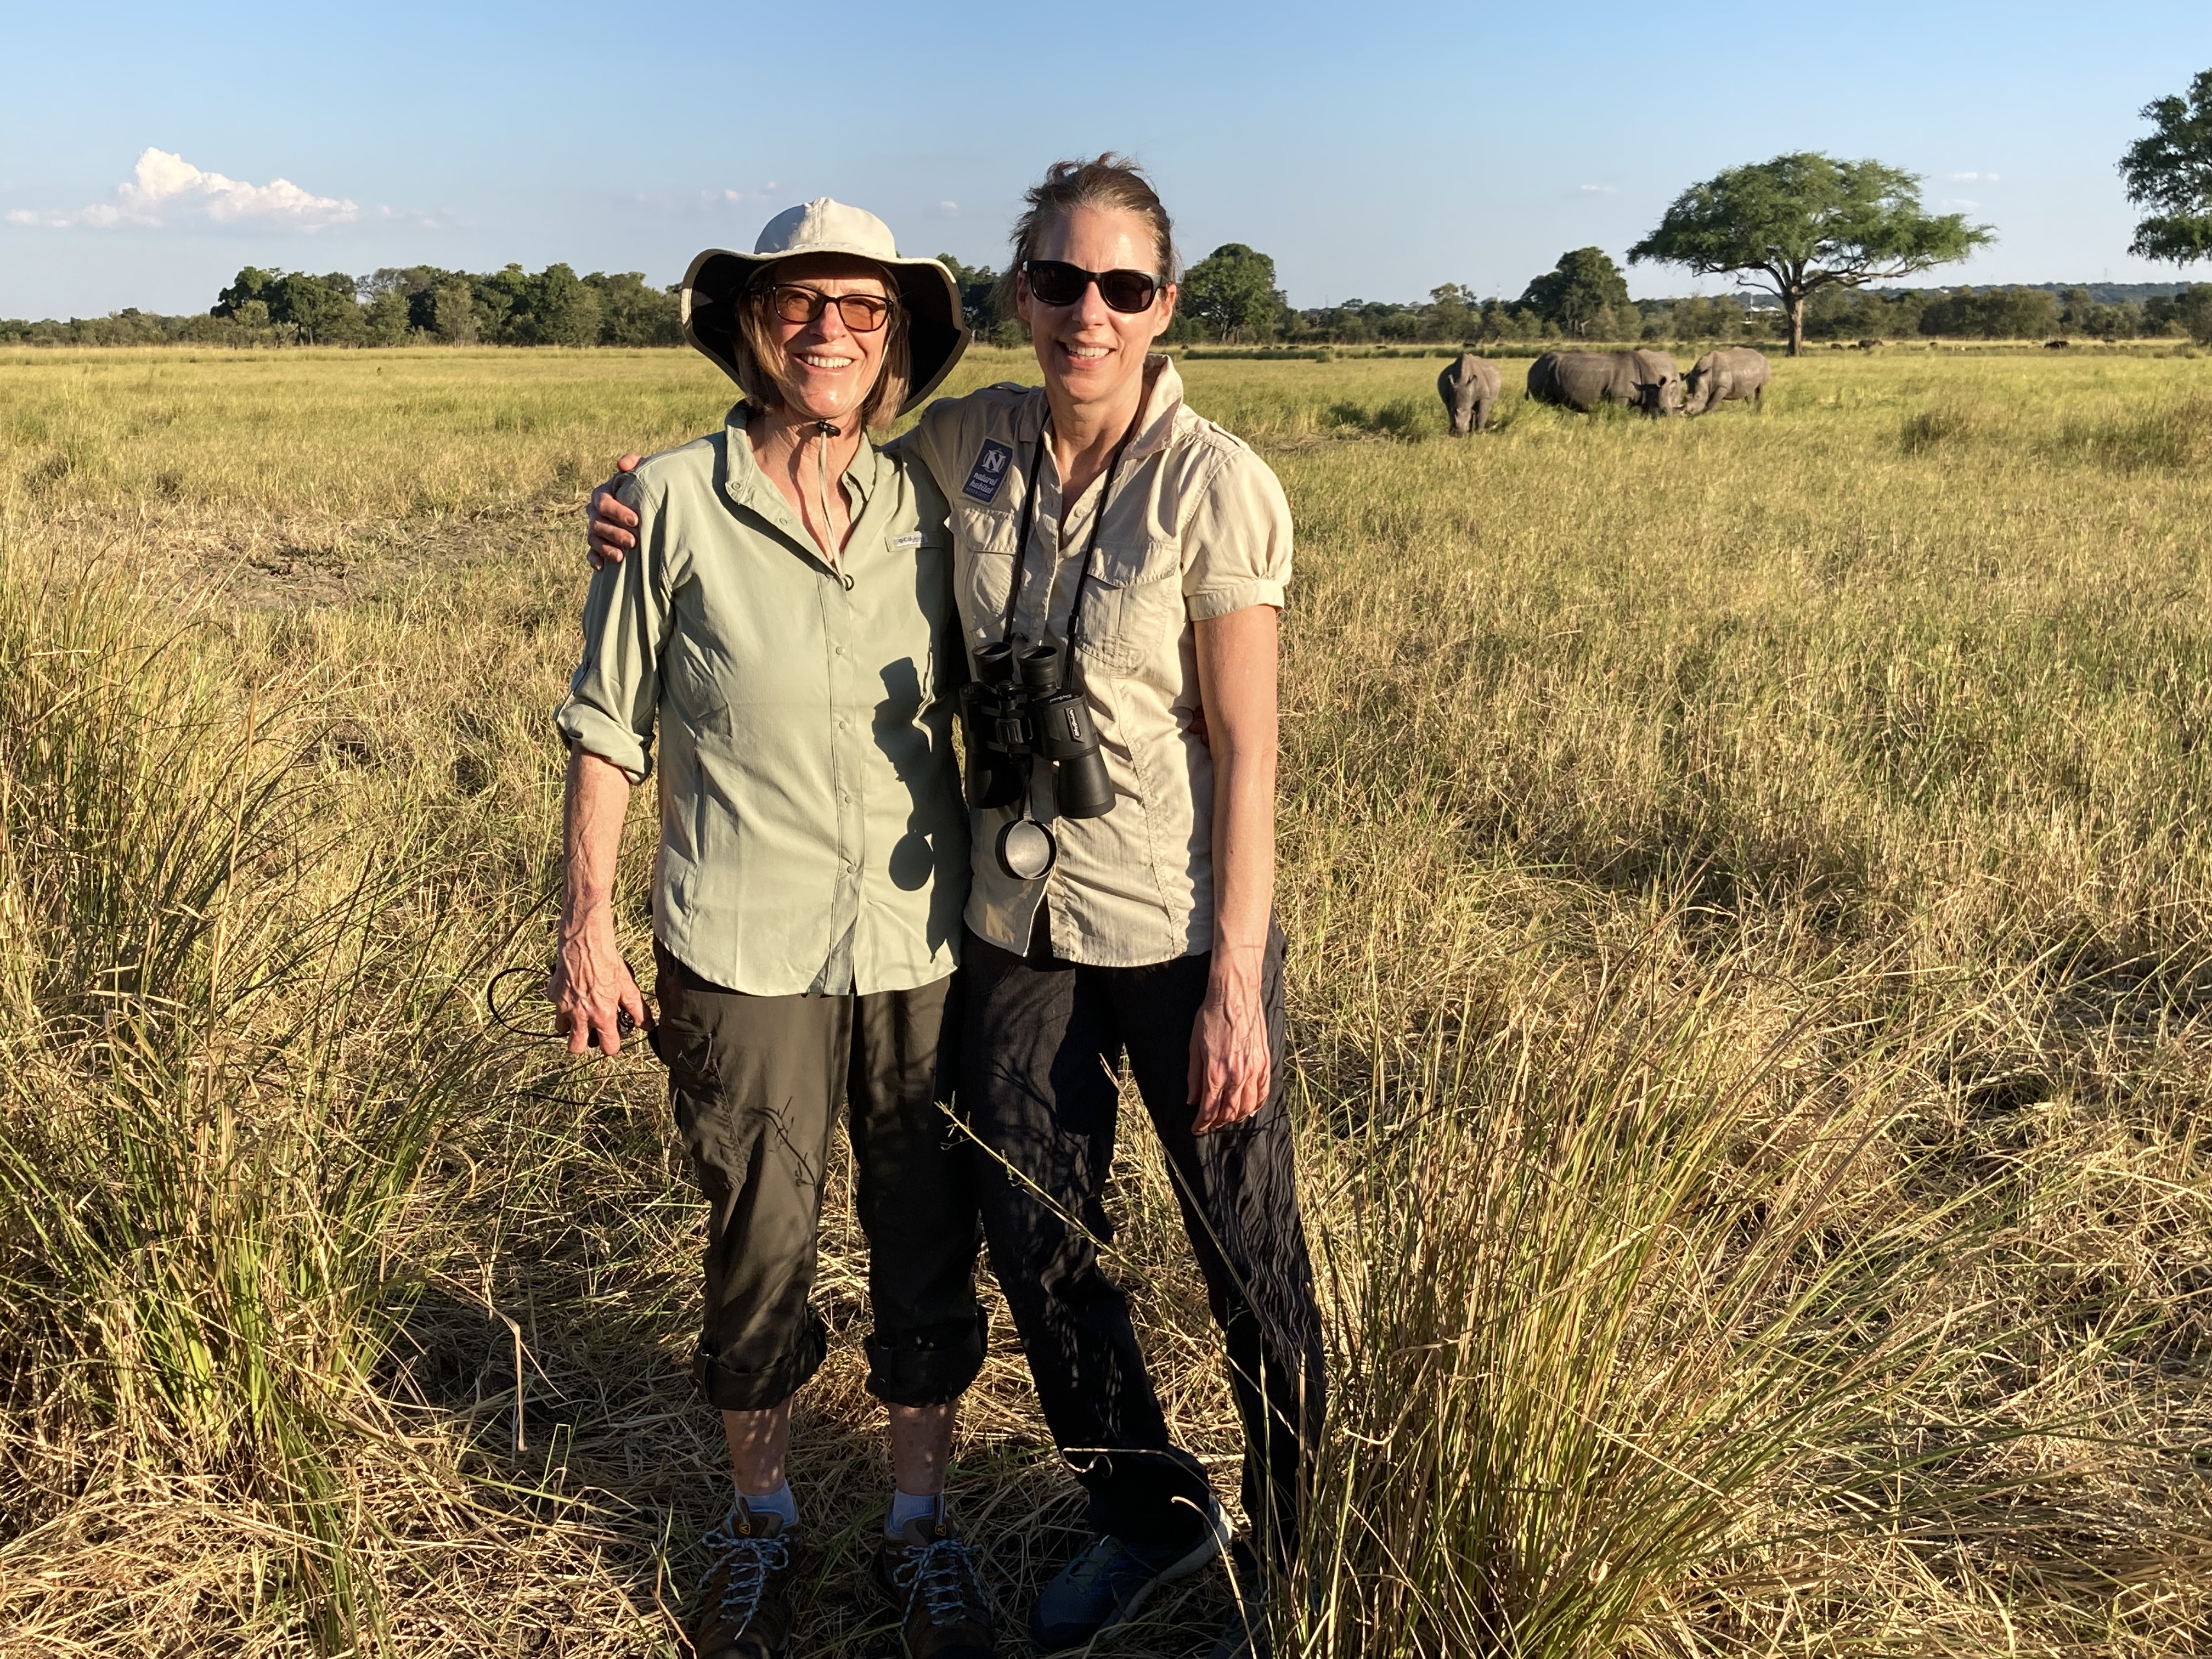 At Mosi-oa-Tunya National Park in Zambia, hanging with Aunt Sally and rhinos.